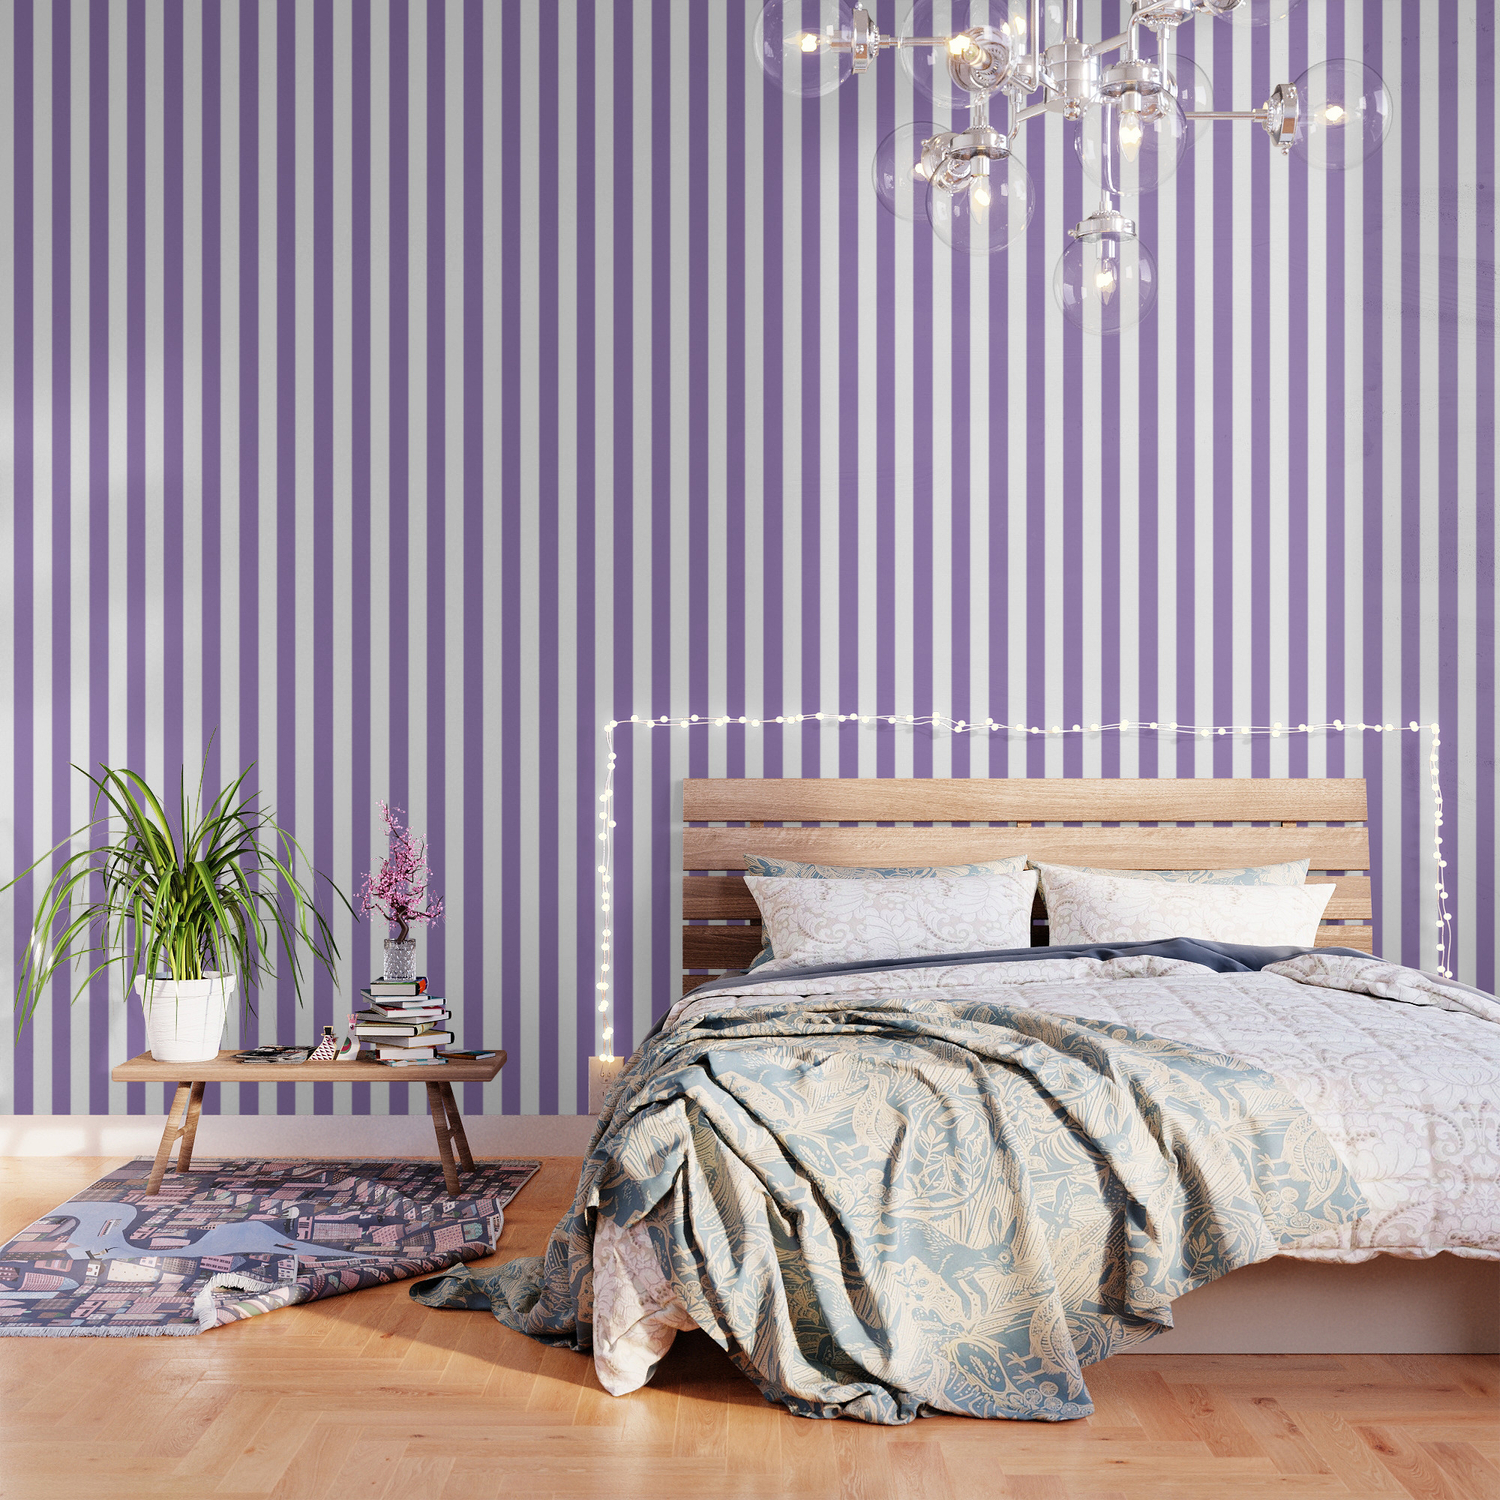 Lavender purple - solid color - white vertical lines pattern Wallpaper by  Make it Colorful | Society6